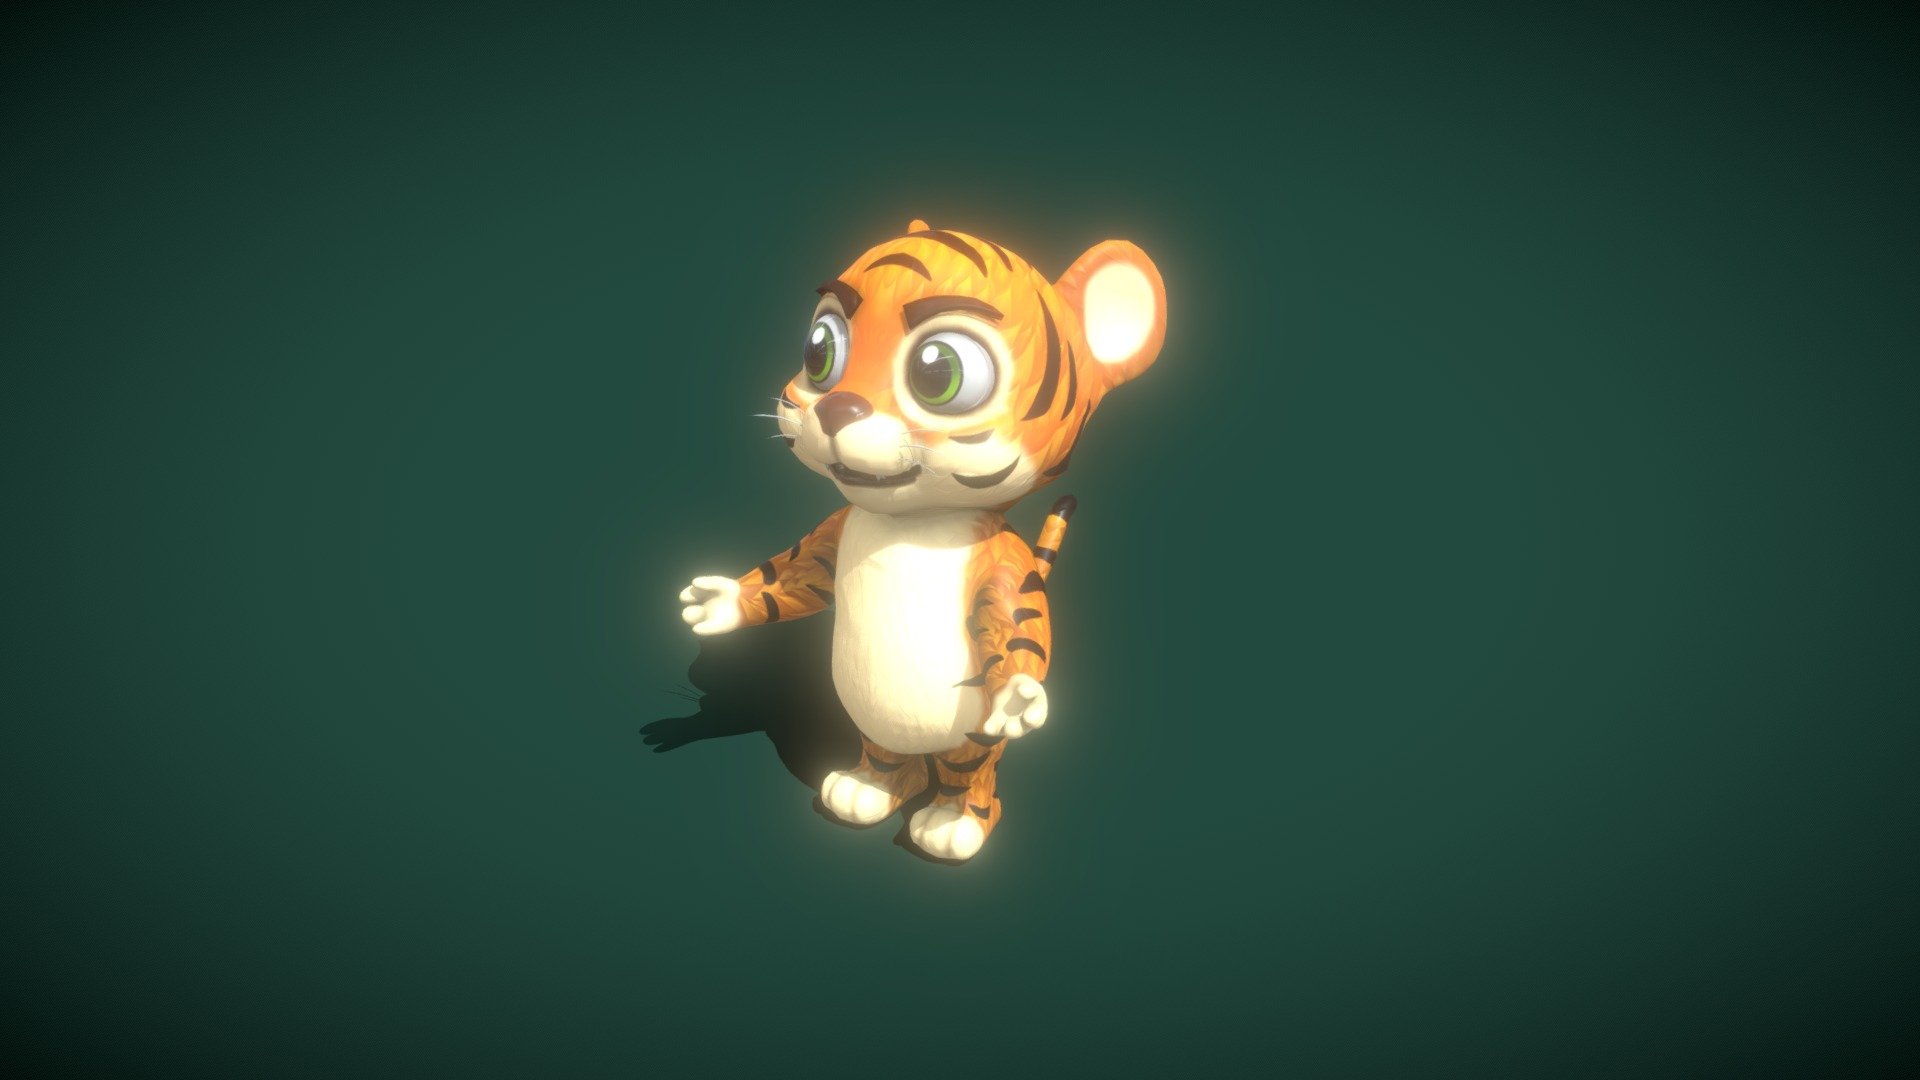 Cartoon Tiger Animated 3D Model is completely ready to be used in your games, animations, films, designs etc.  

All textures and materials are included and mapped in every format. The model is completely ready for visualization in any 3d software and engine.  

Technical details:  




File formats included in the package are: FBX, OBJ, GLB, ABC, DAE, PLY, STL, BLEND, gLTF (generated), USDZ (generated)

Native software file format: BLEND

Render engine: Eevee

Polygons: 6,120

Vertices: 5,789

Textures: Color, Metallic, Roughness, Normal, AO

All textures are 2k resolution.

The model is rigged and animated.

6 animations are included: idle, walk, run, talk, sing, dance. All animations are full cycles.

Only following formats contain rig and animation: BLEND, FBX, GLTF/GLB
 - Cartoon Tiger Animated 3D Model - Buy Royalty Free 3D model by 3DDisco 3d model